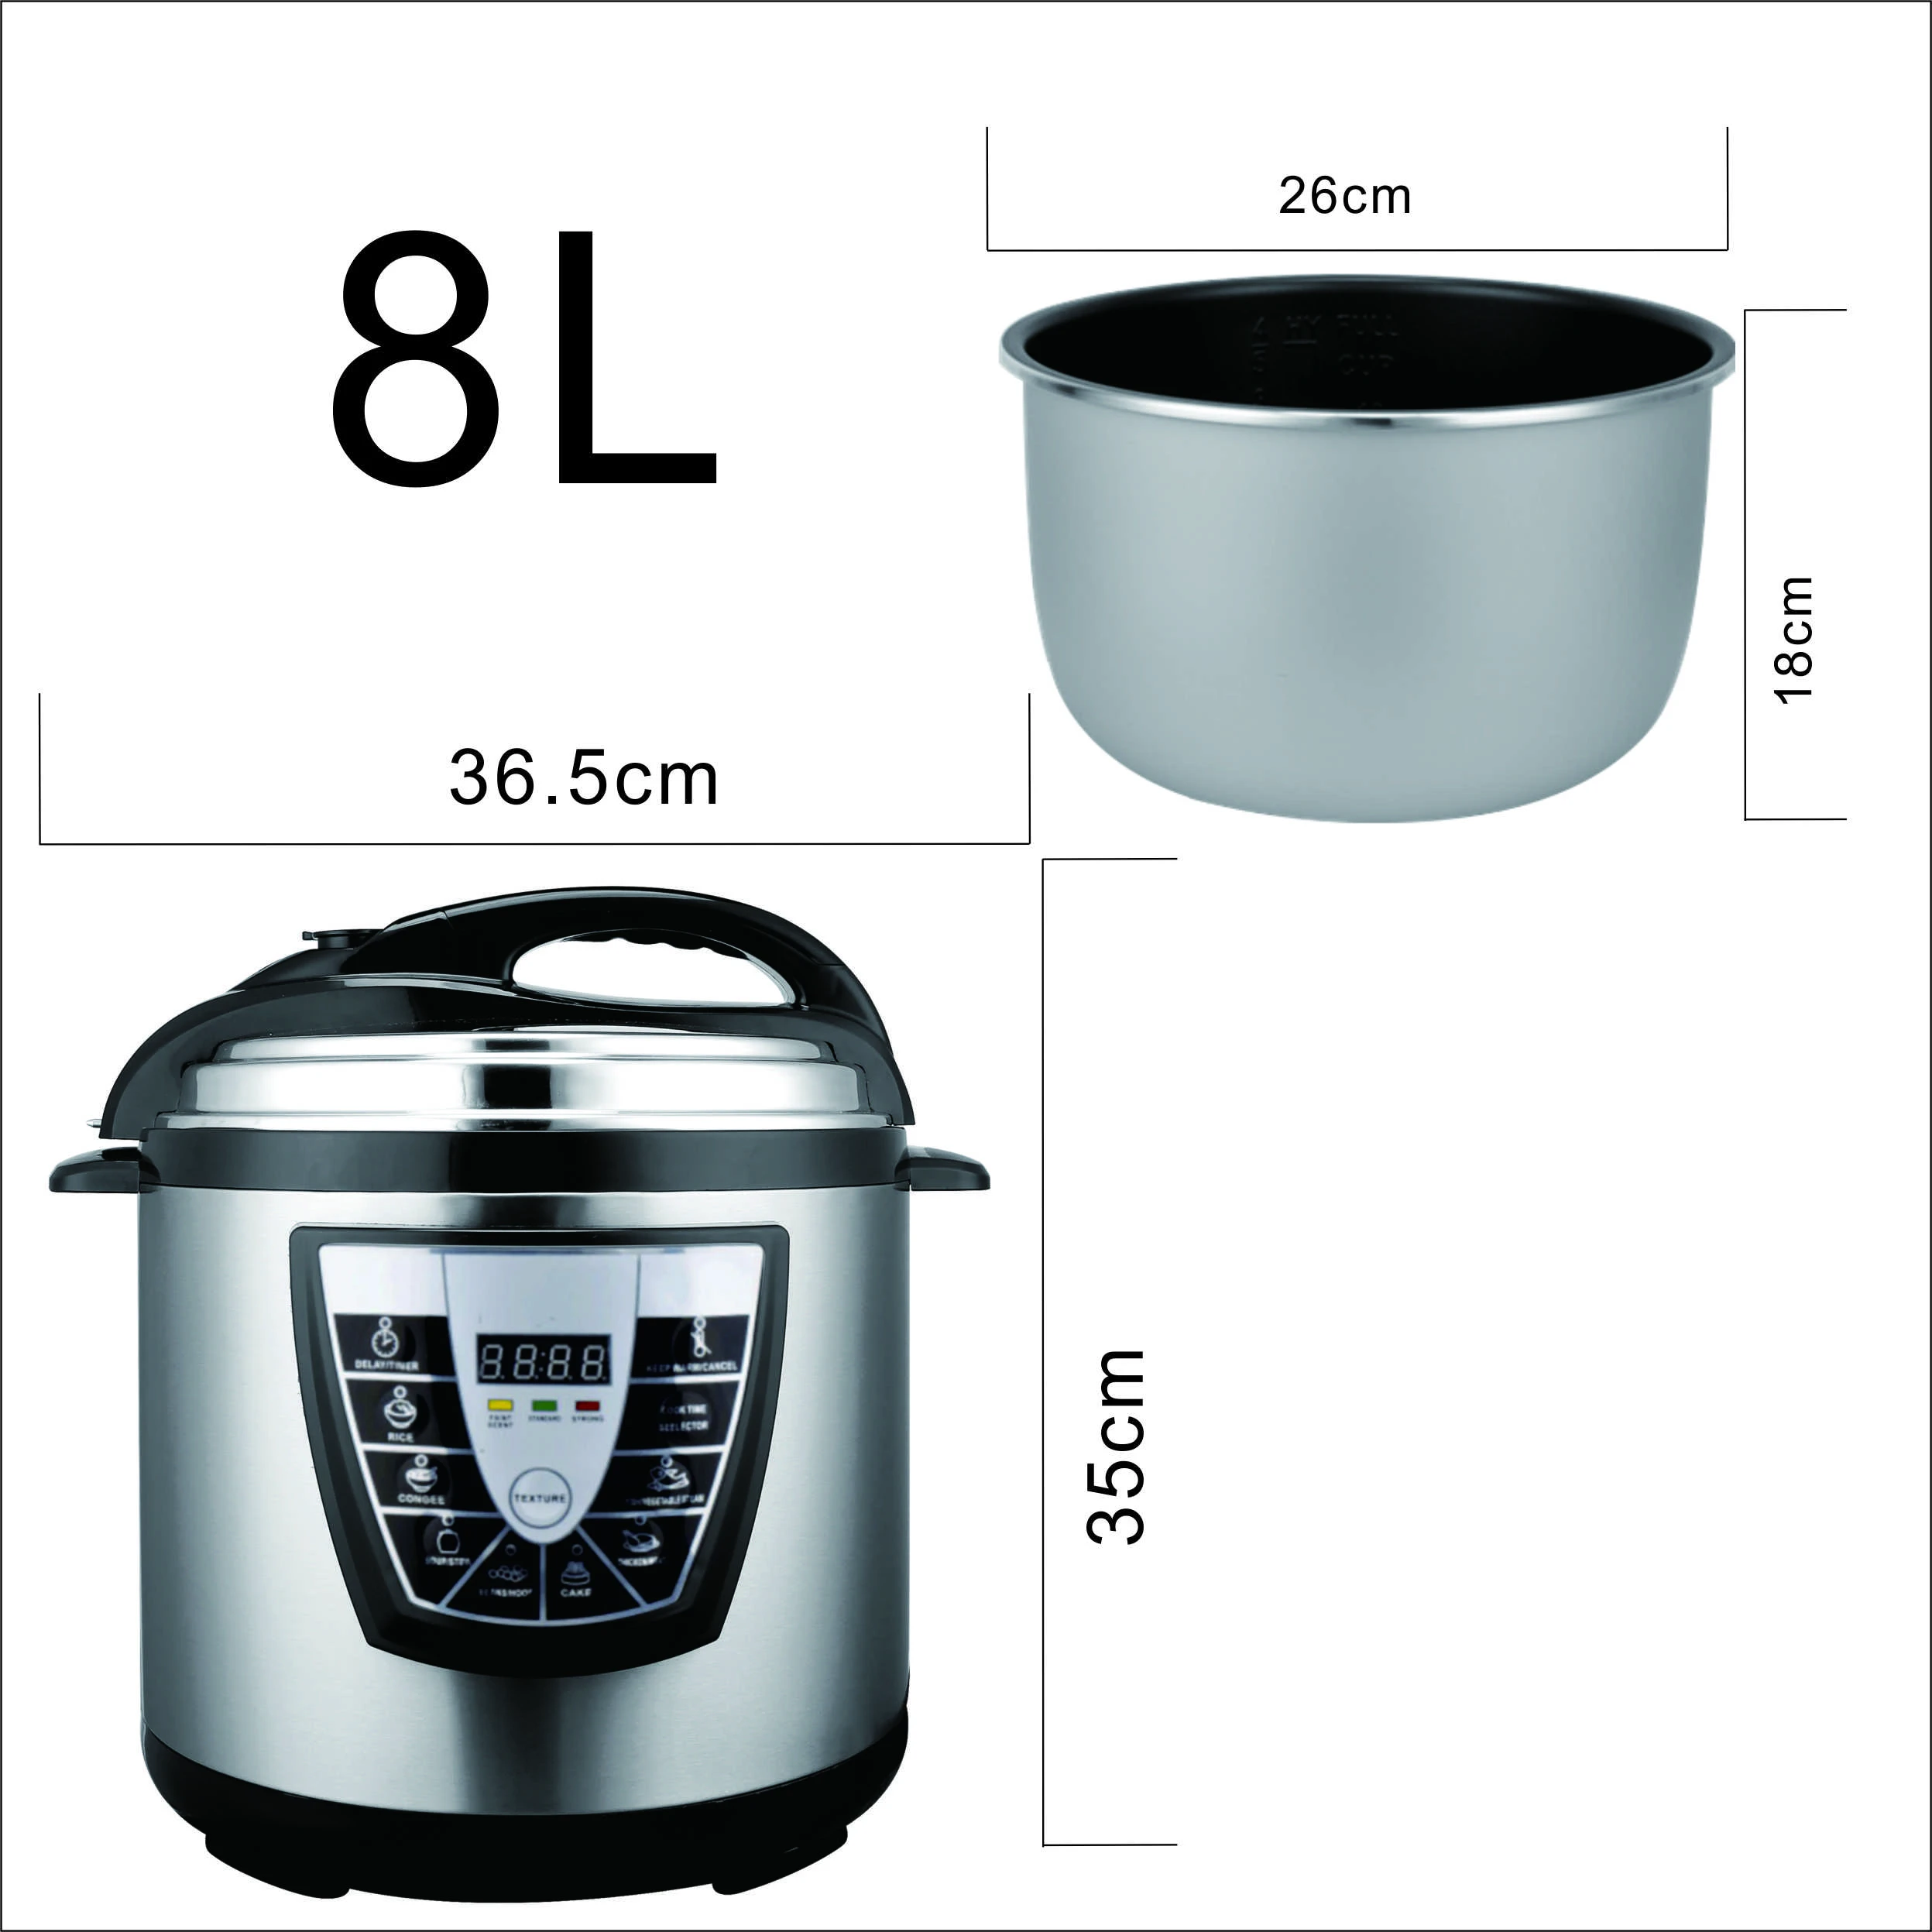 Household auto electric pressure cooker german cookers 10l